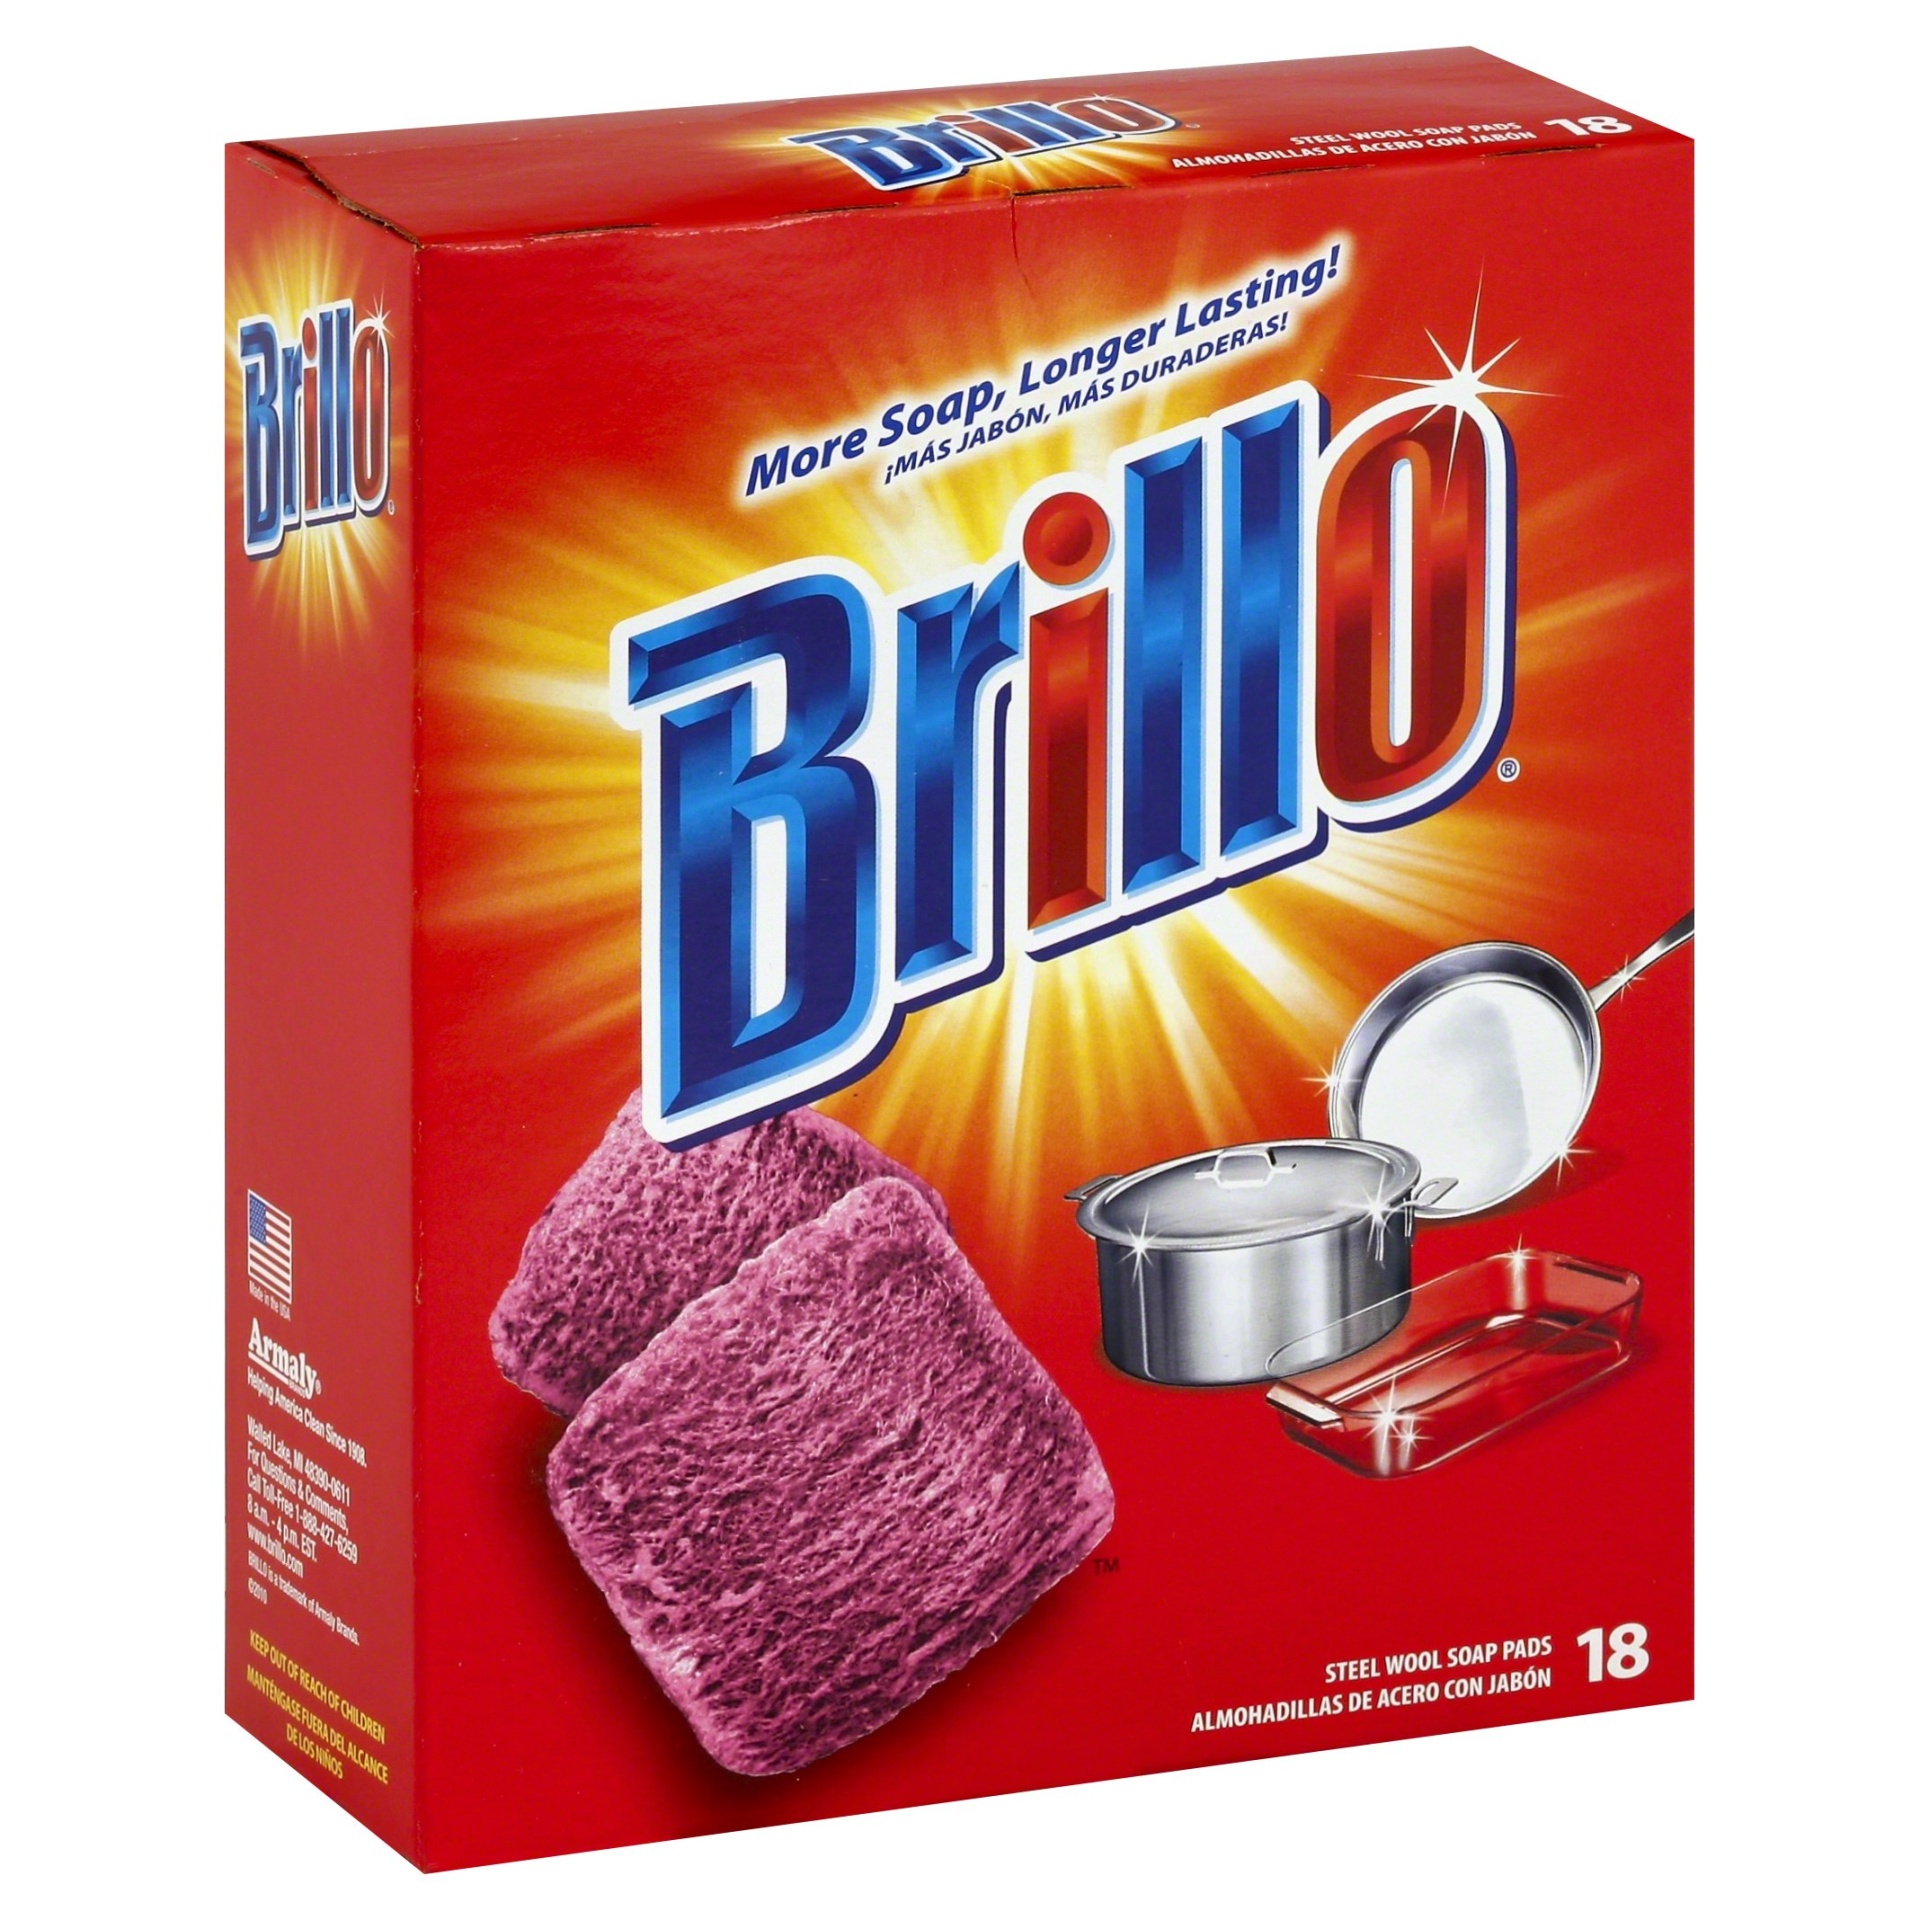 slide 1 of 1, Brillo Steel Wool Soap Pads Red, 18 ct